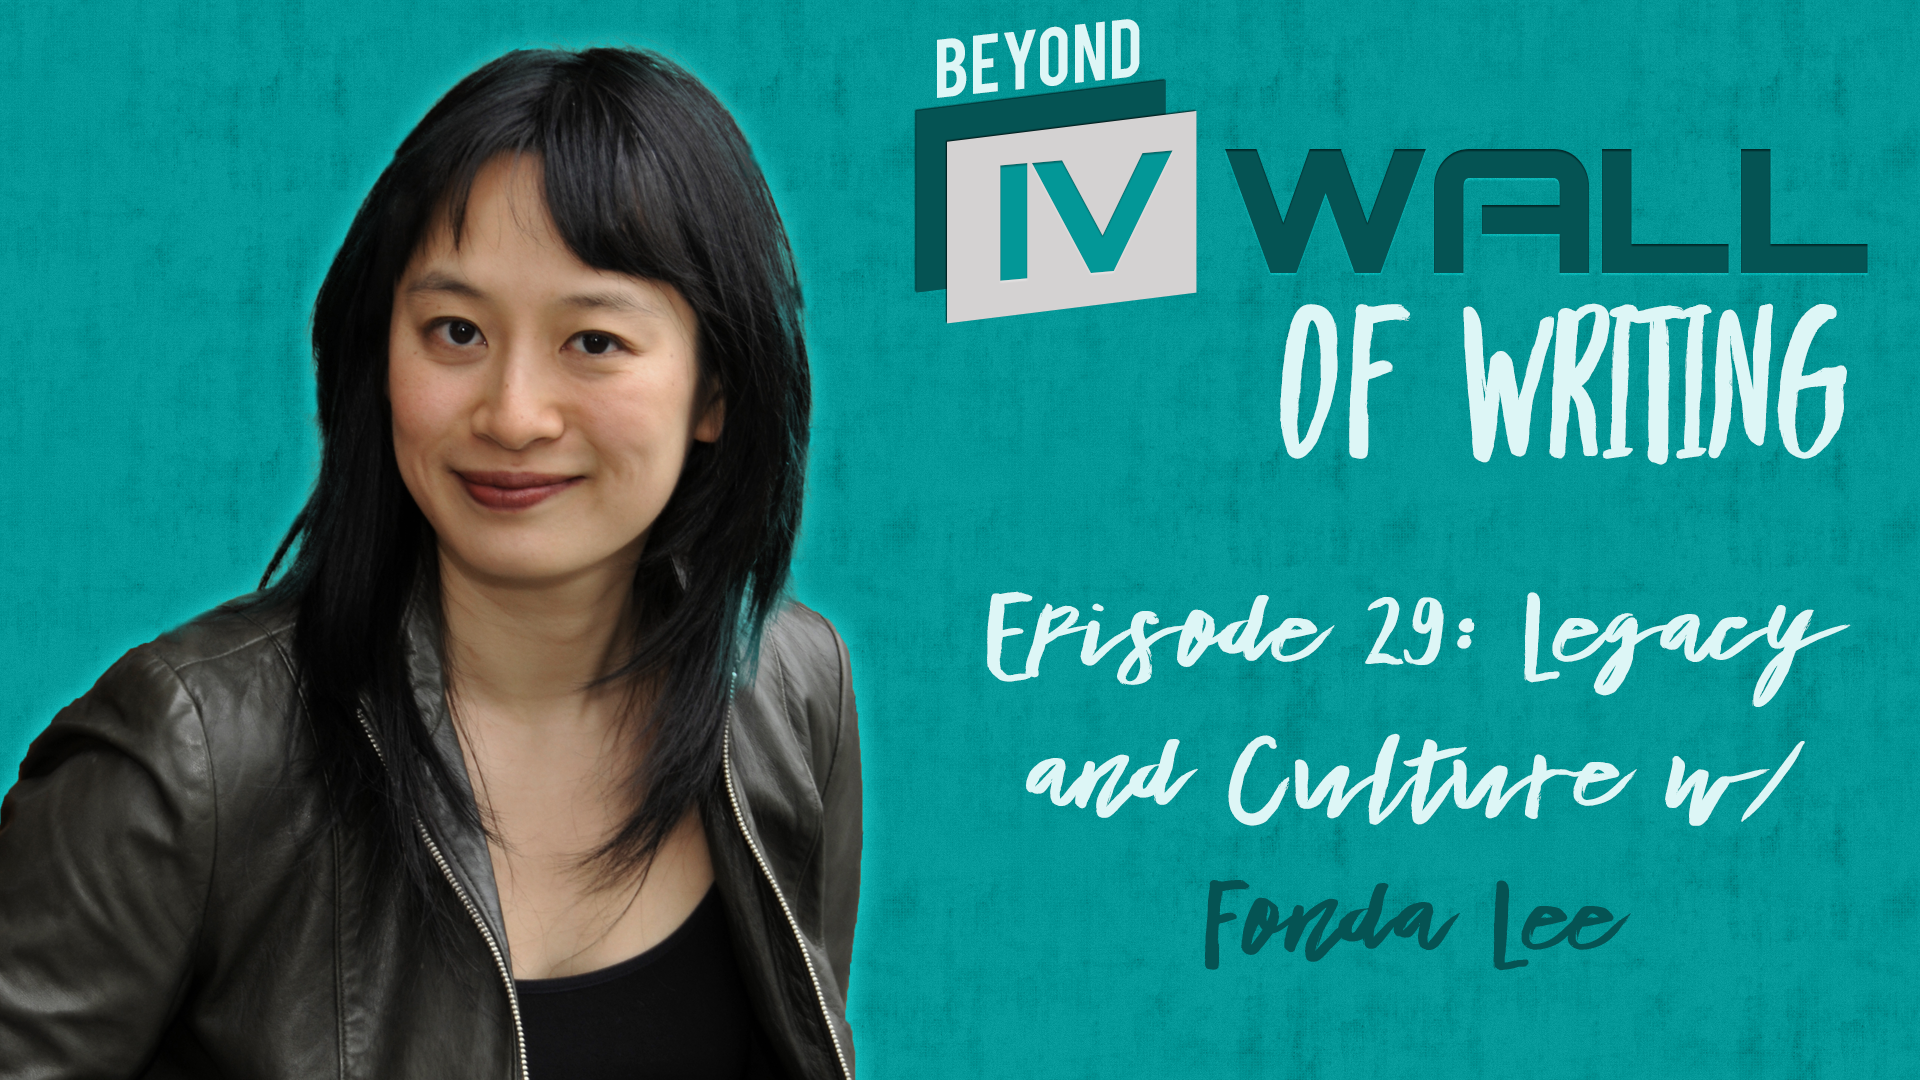 Beyond the IVWall of Writing Episode 29- Legacy and Culture with Fonda Lee Blog Image